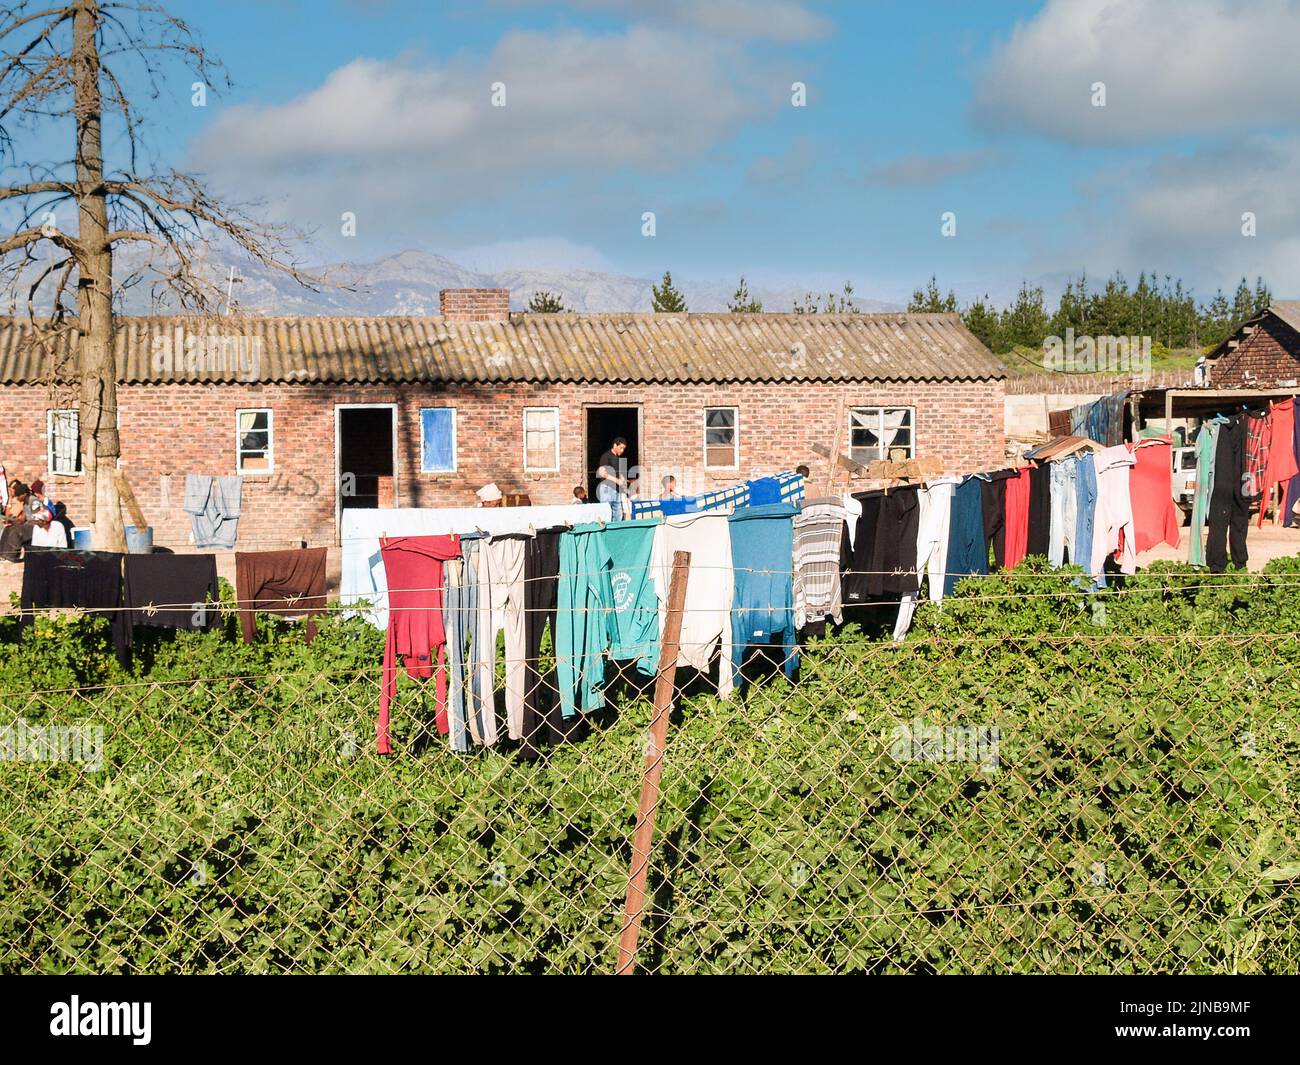 African rural workers cottages, yards and drying washing n sunny day Stock Photo